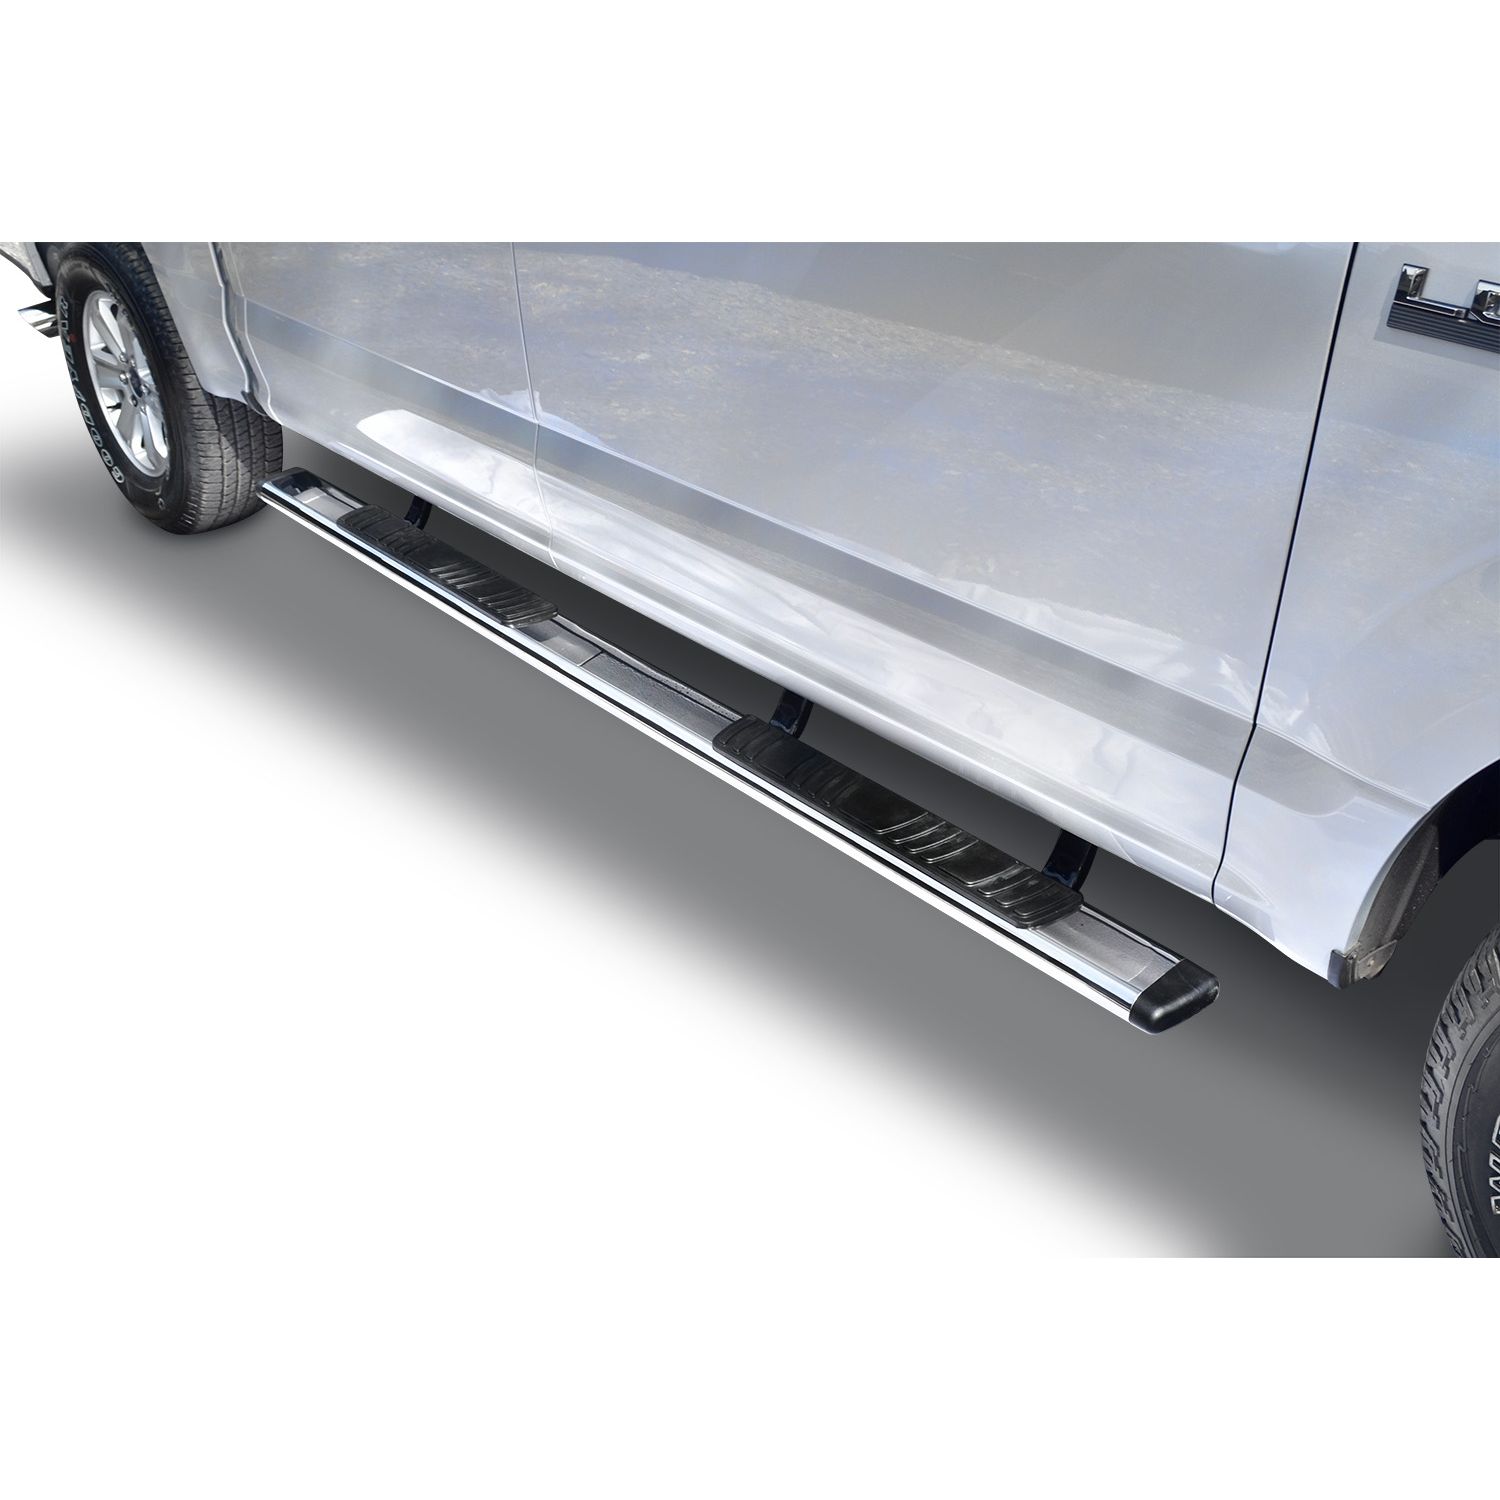 Go Rhino 685415587PS - 5" OE Xtreme Low Profile SideSteps With Mounting Bracket Kit - Polished Stainless Steel